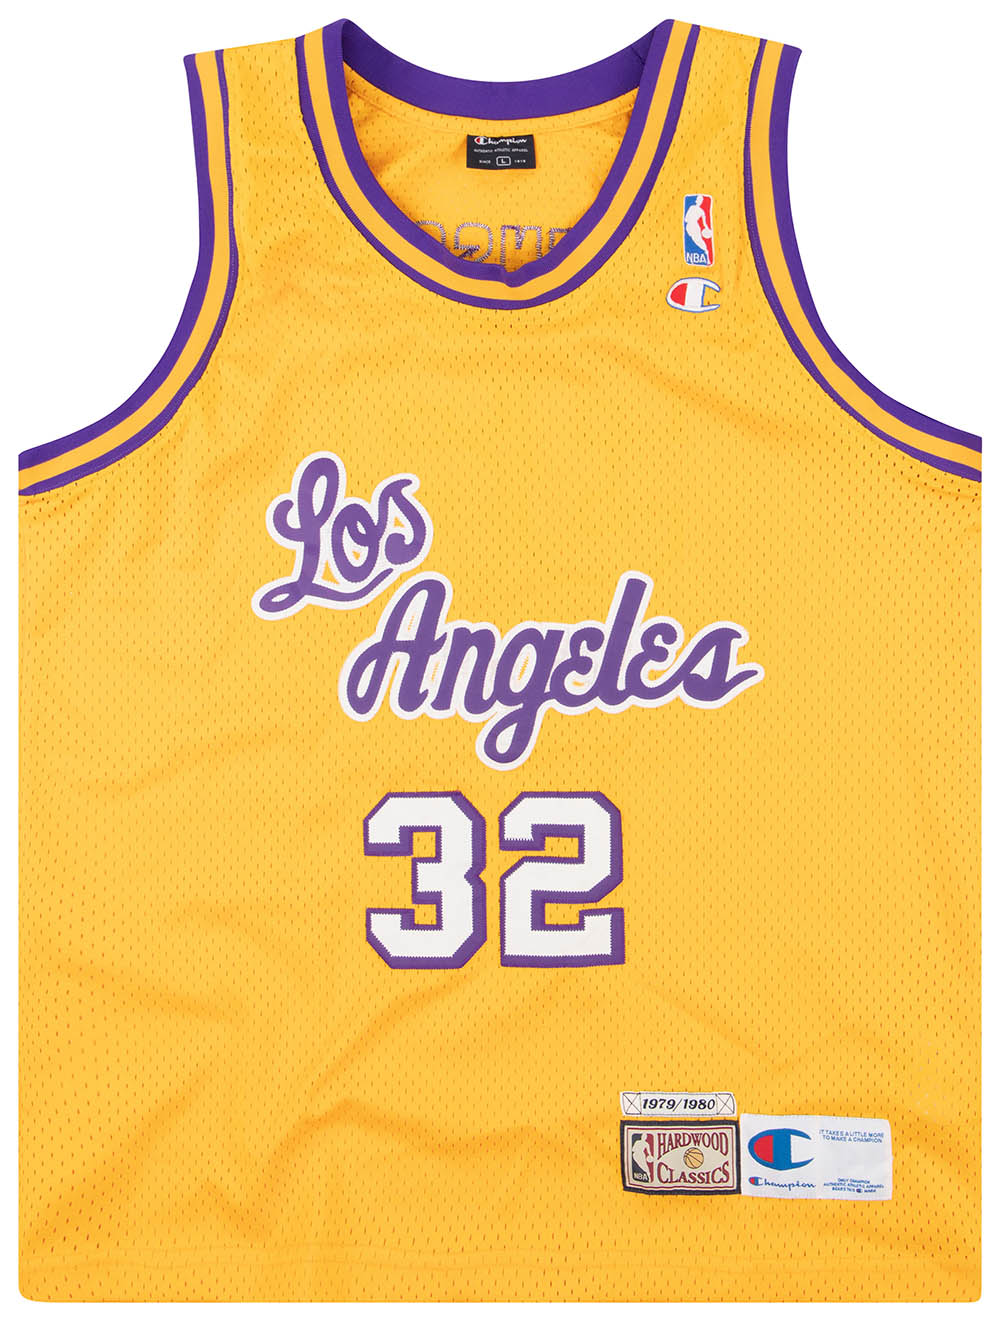 2000 lakers jersey